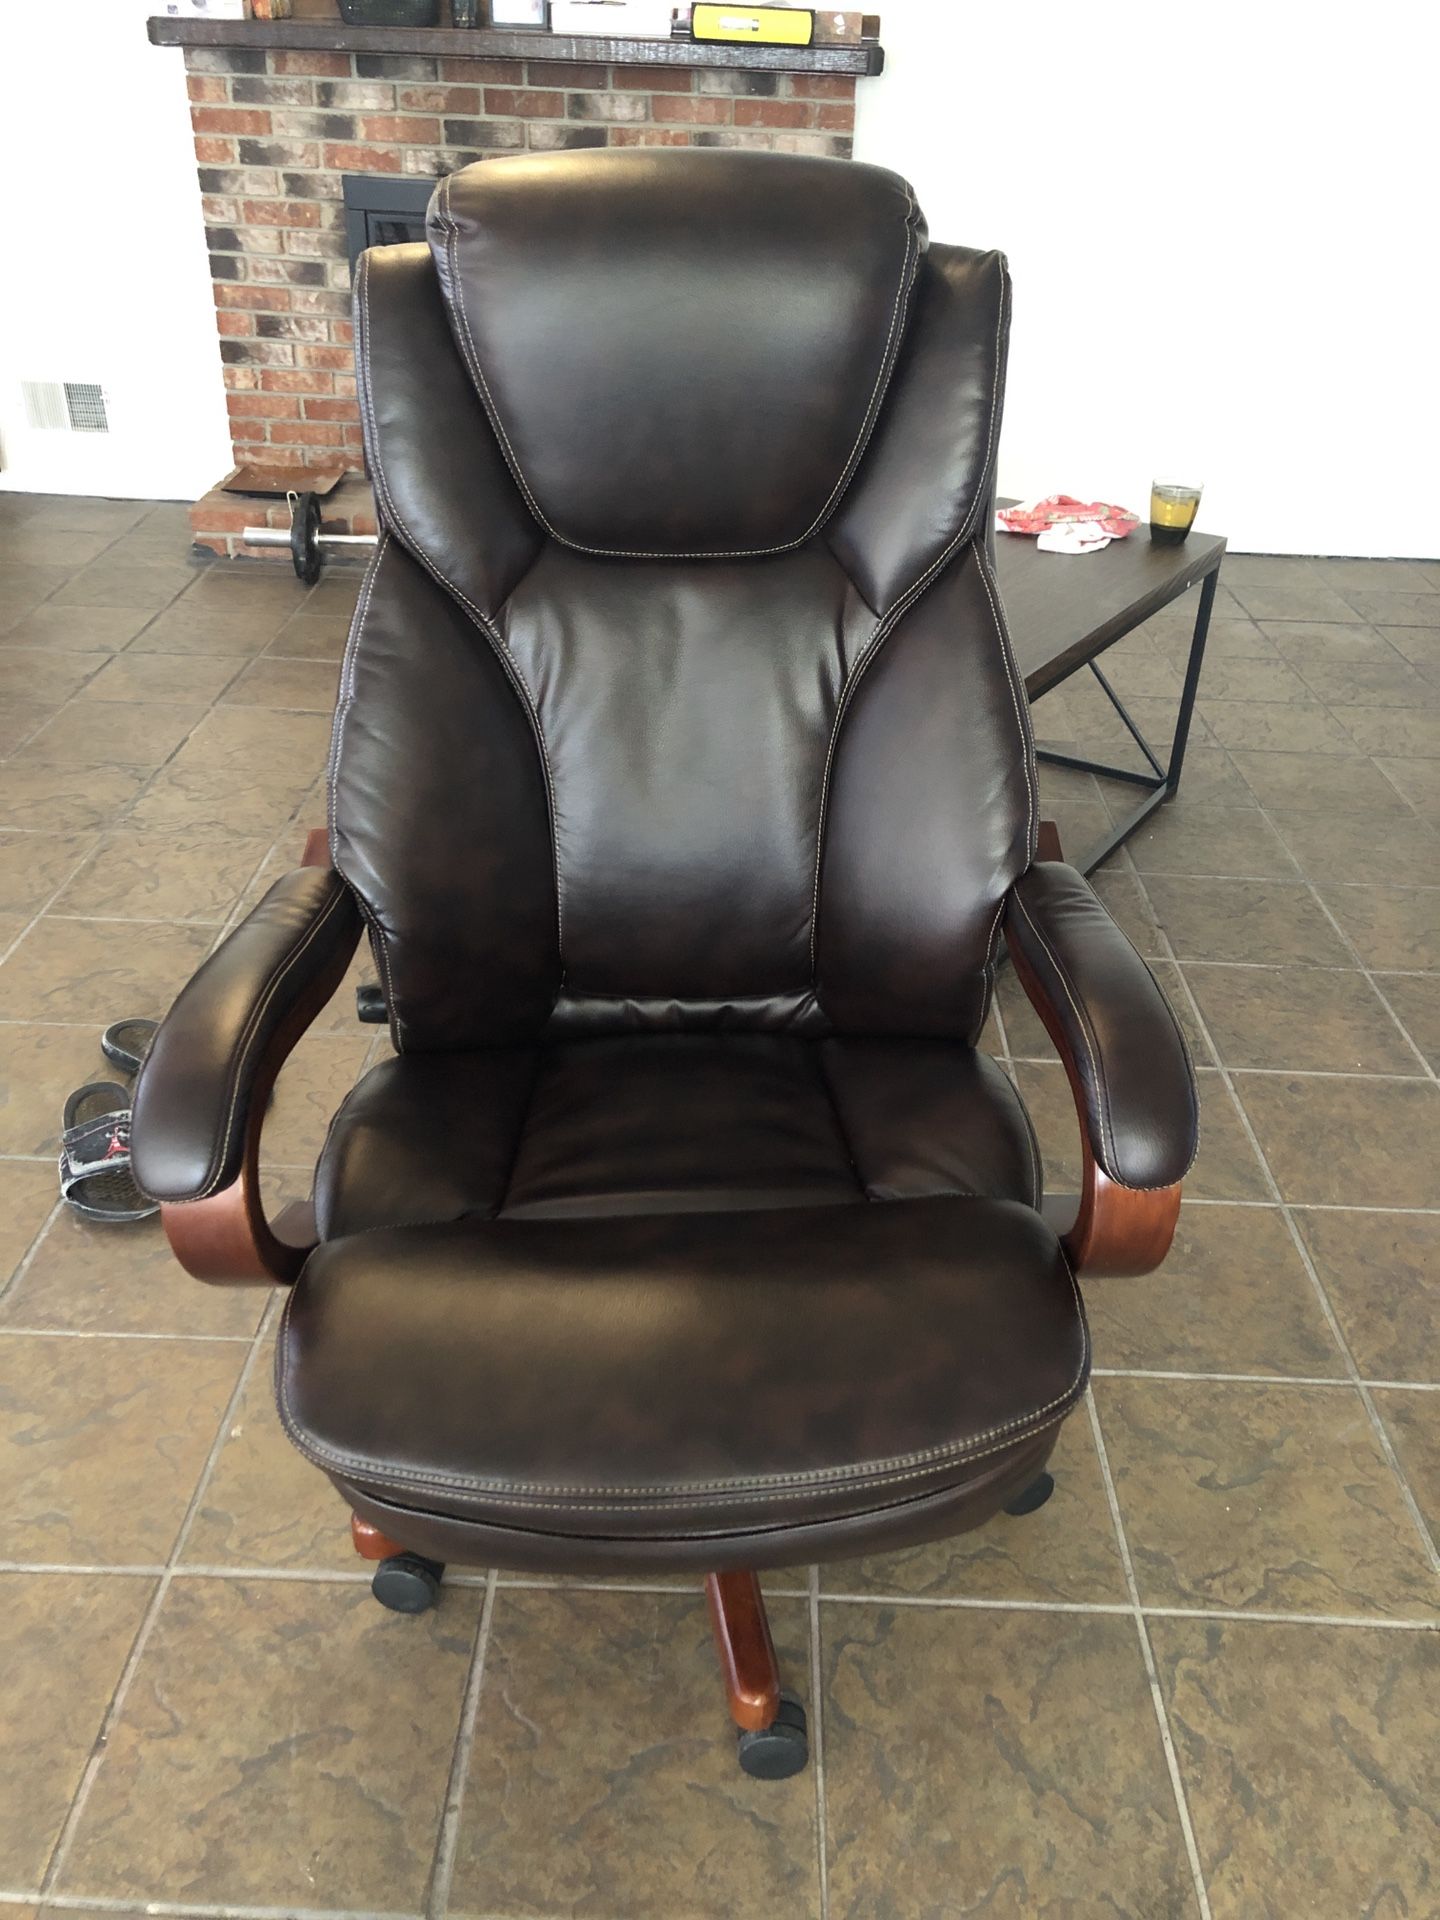 BarcaLounger executive leather office chair